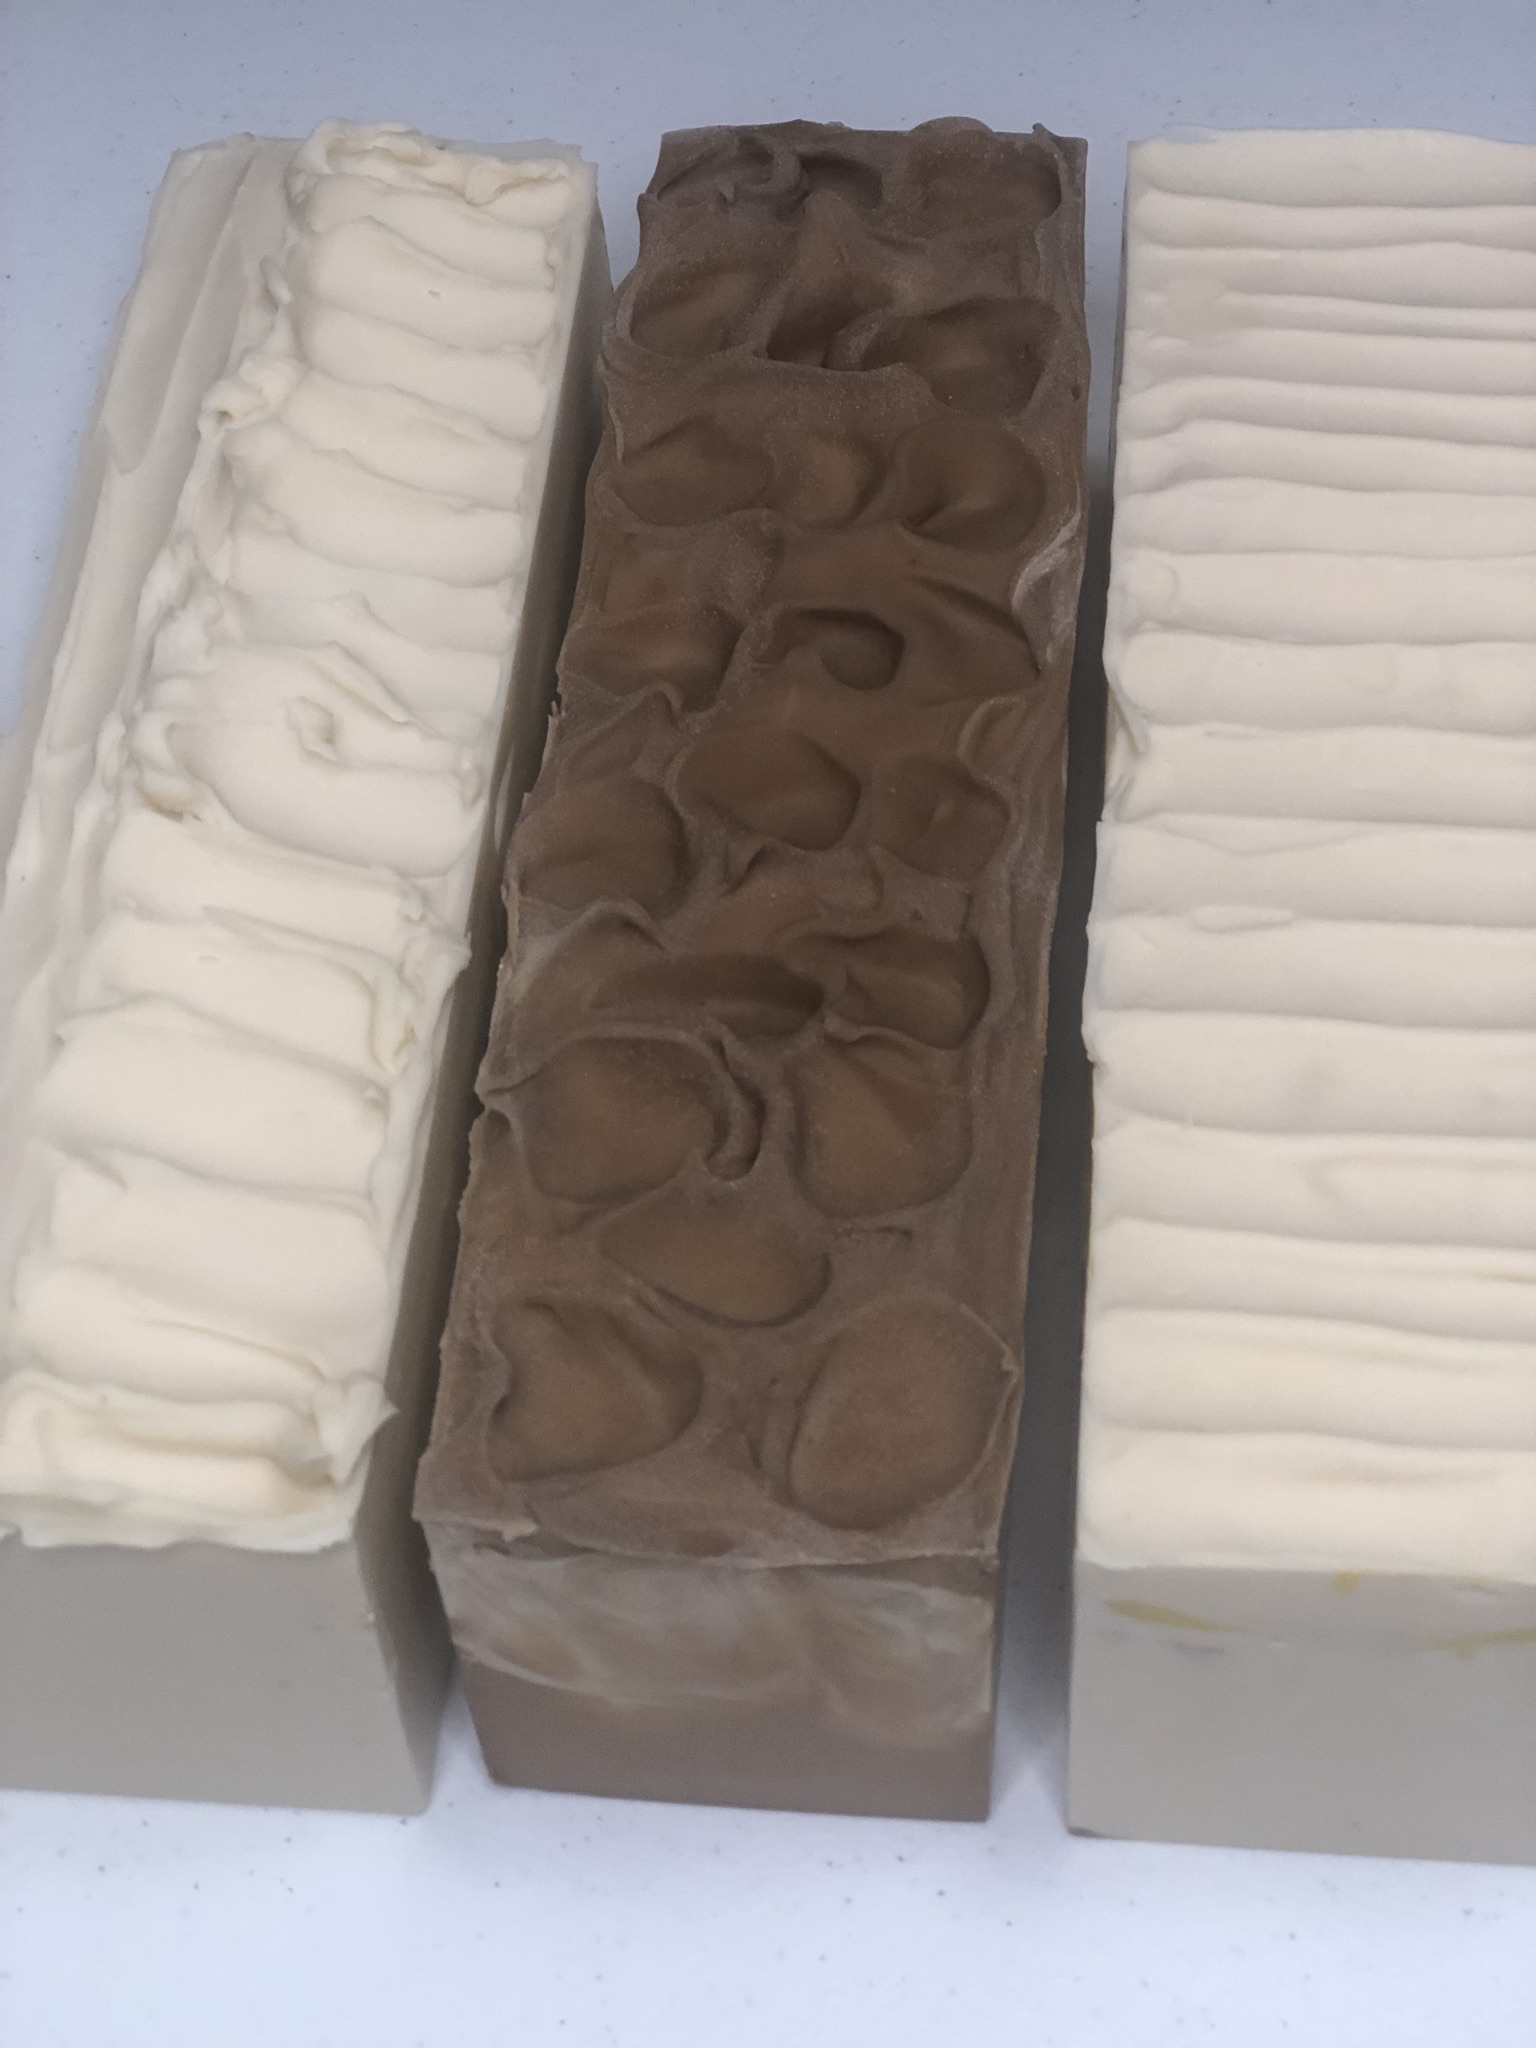 Wholesale soap by the loaf